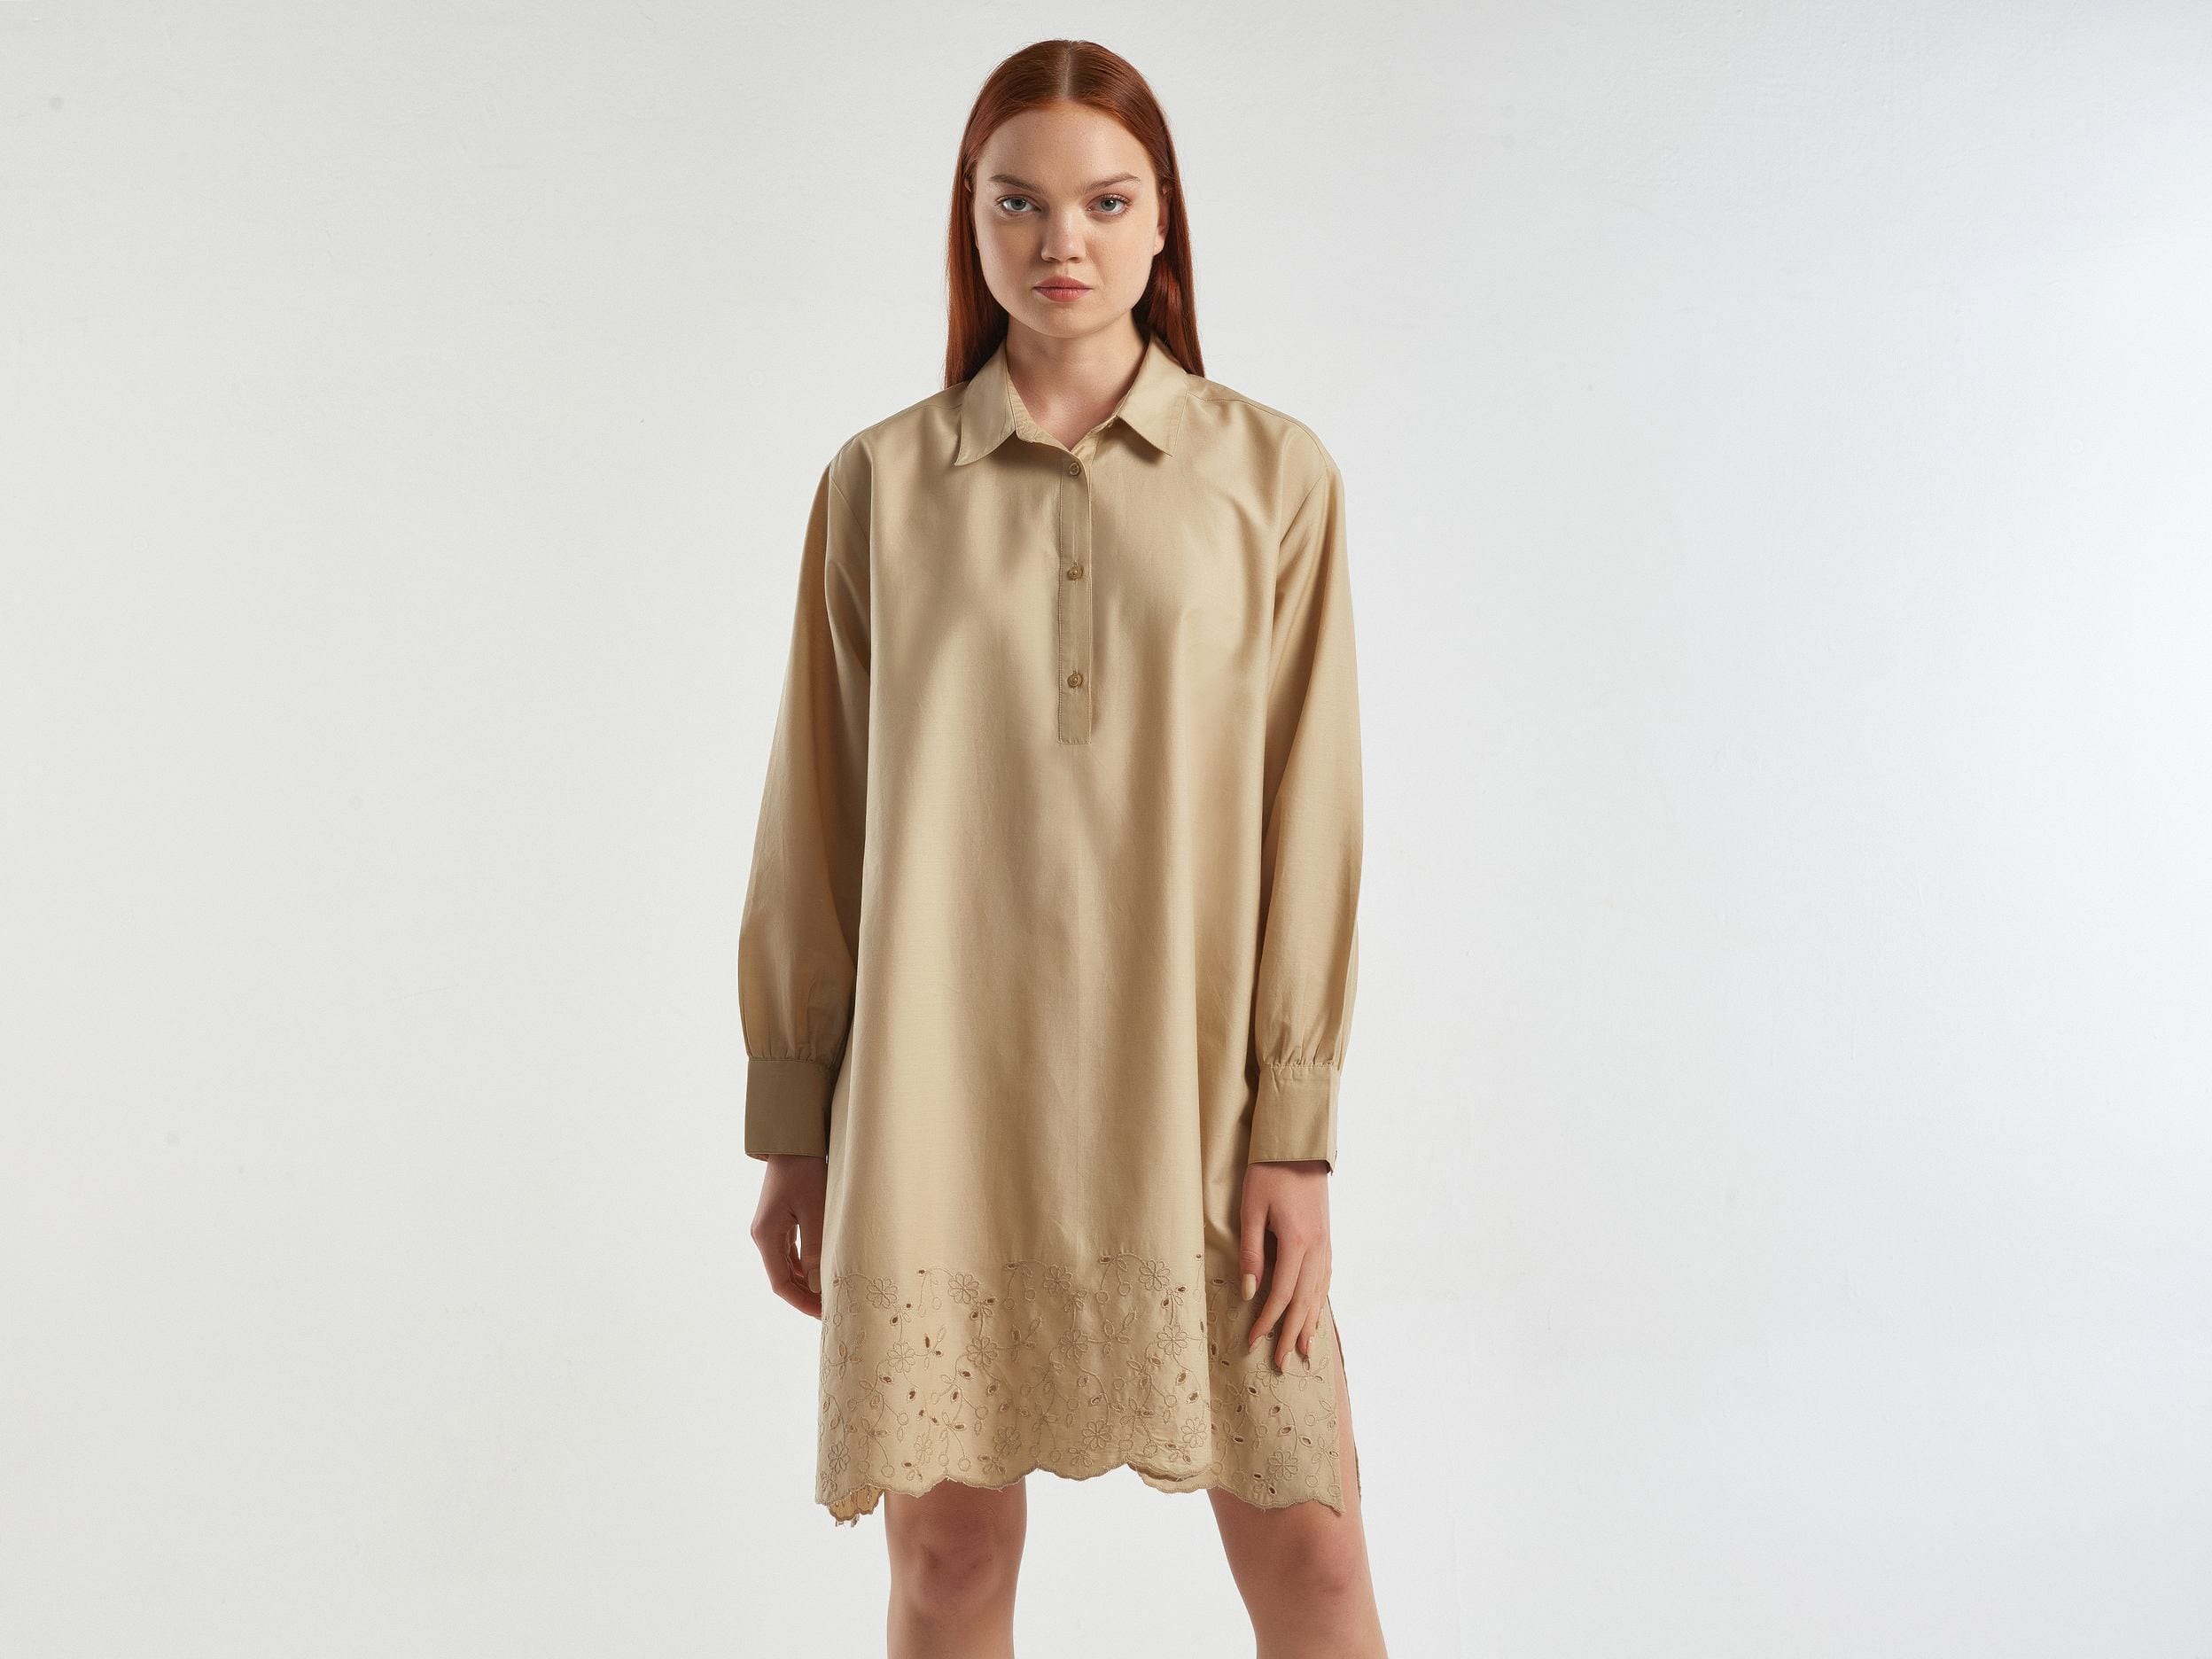 Shirt dress with broderie anglaise embroidery